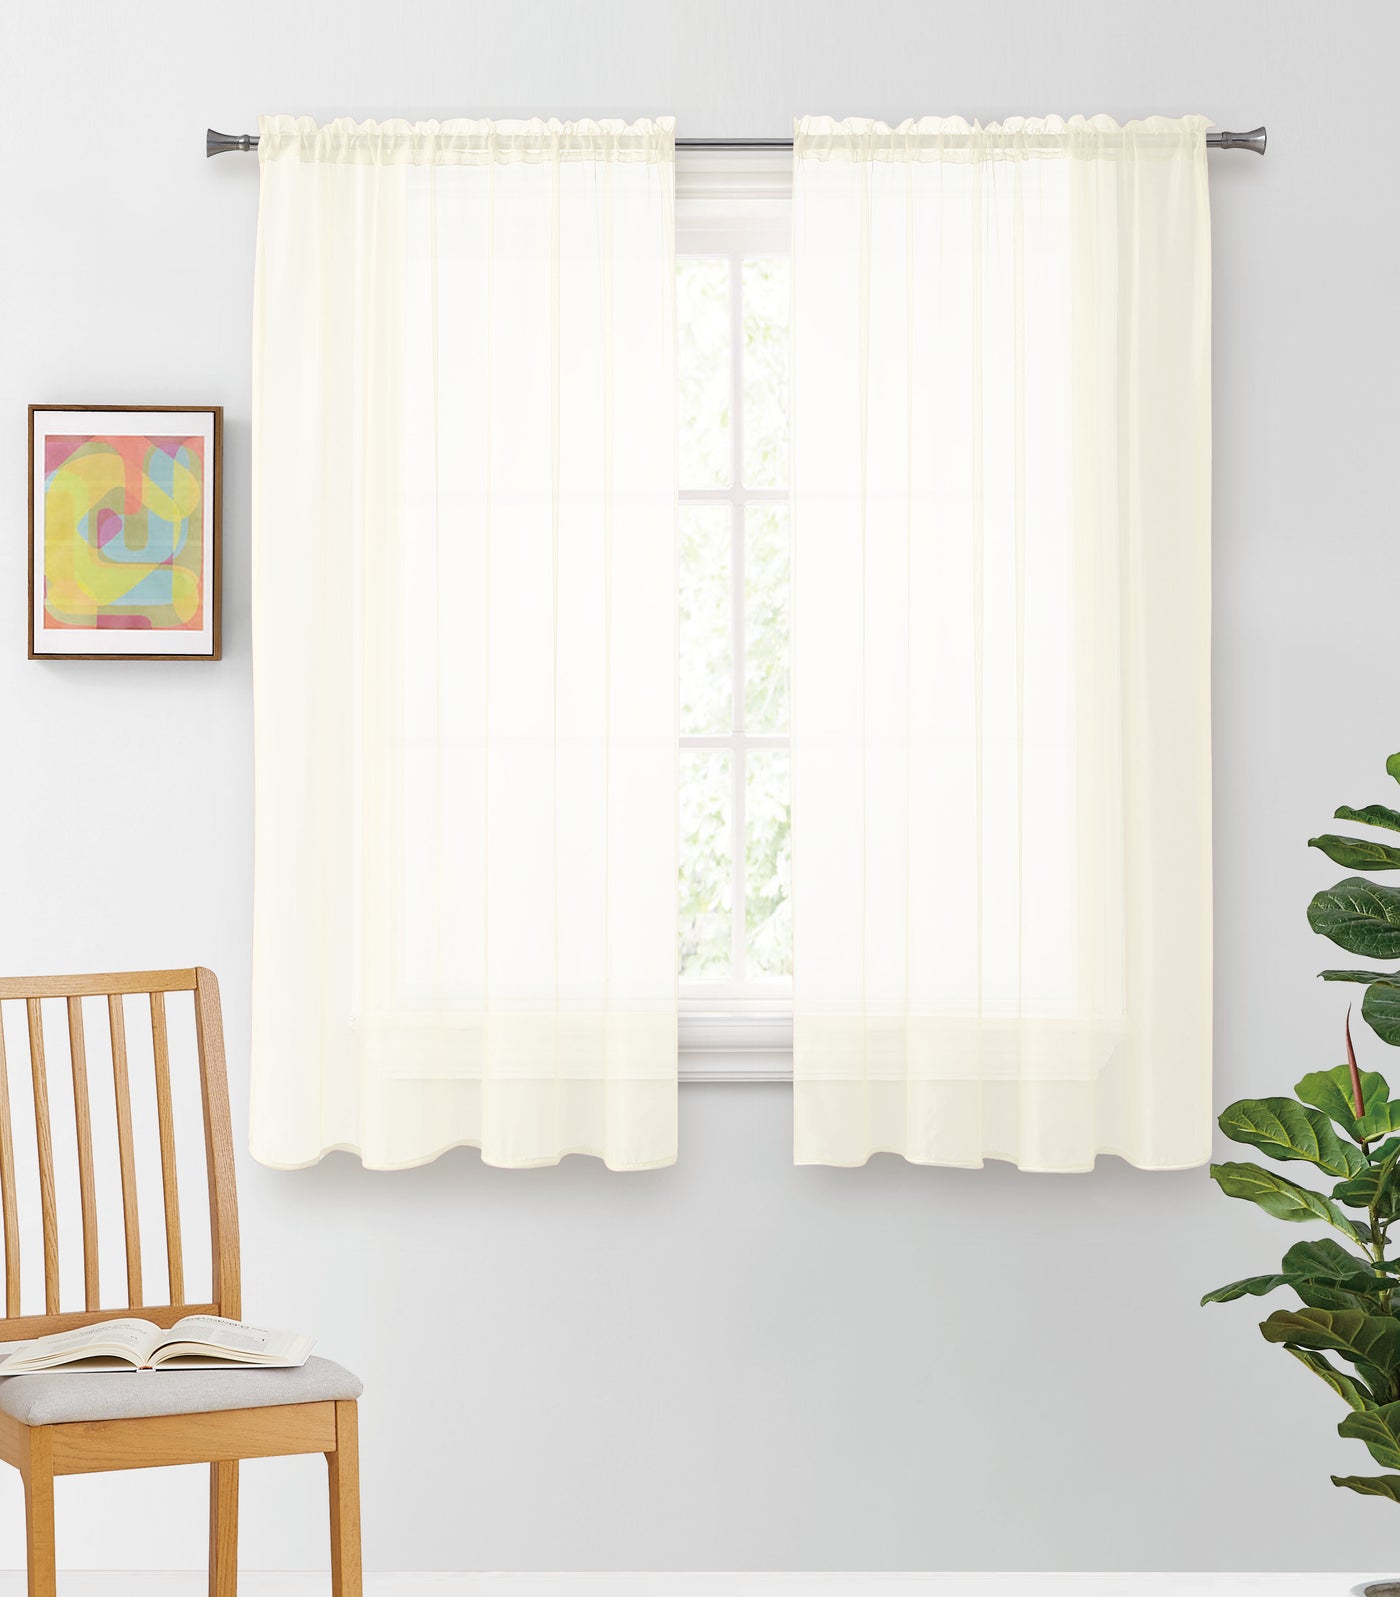 Solid Voile Rod Pocket Sheer Curtains for Bedroom Drapes Set of 2 63" Curtains for Bedroom Panels Window Treatment Home Decor 63" | Jenin Home Furnishing.